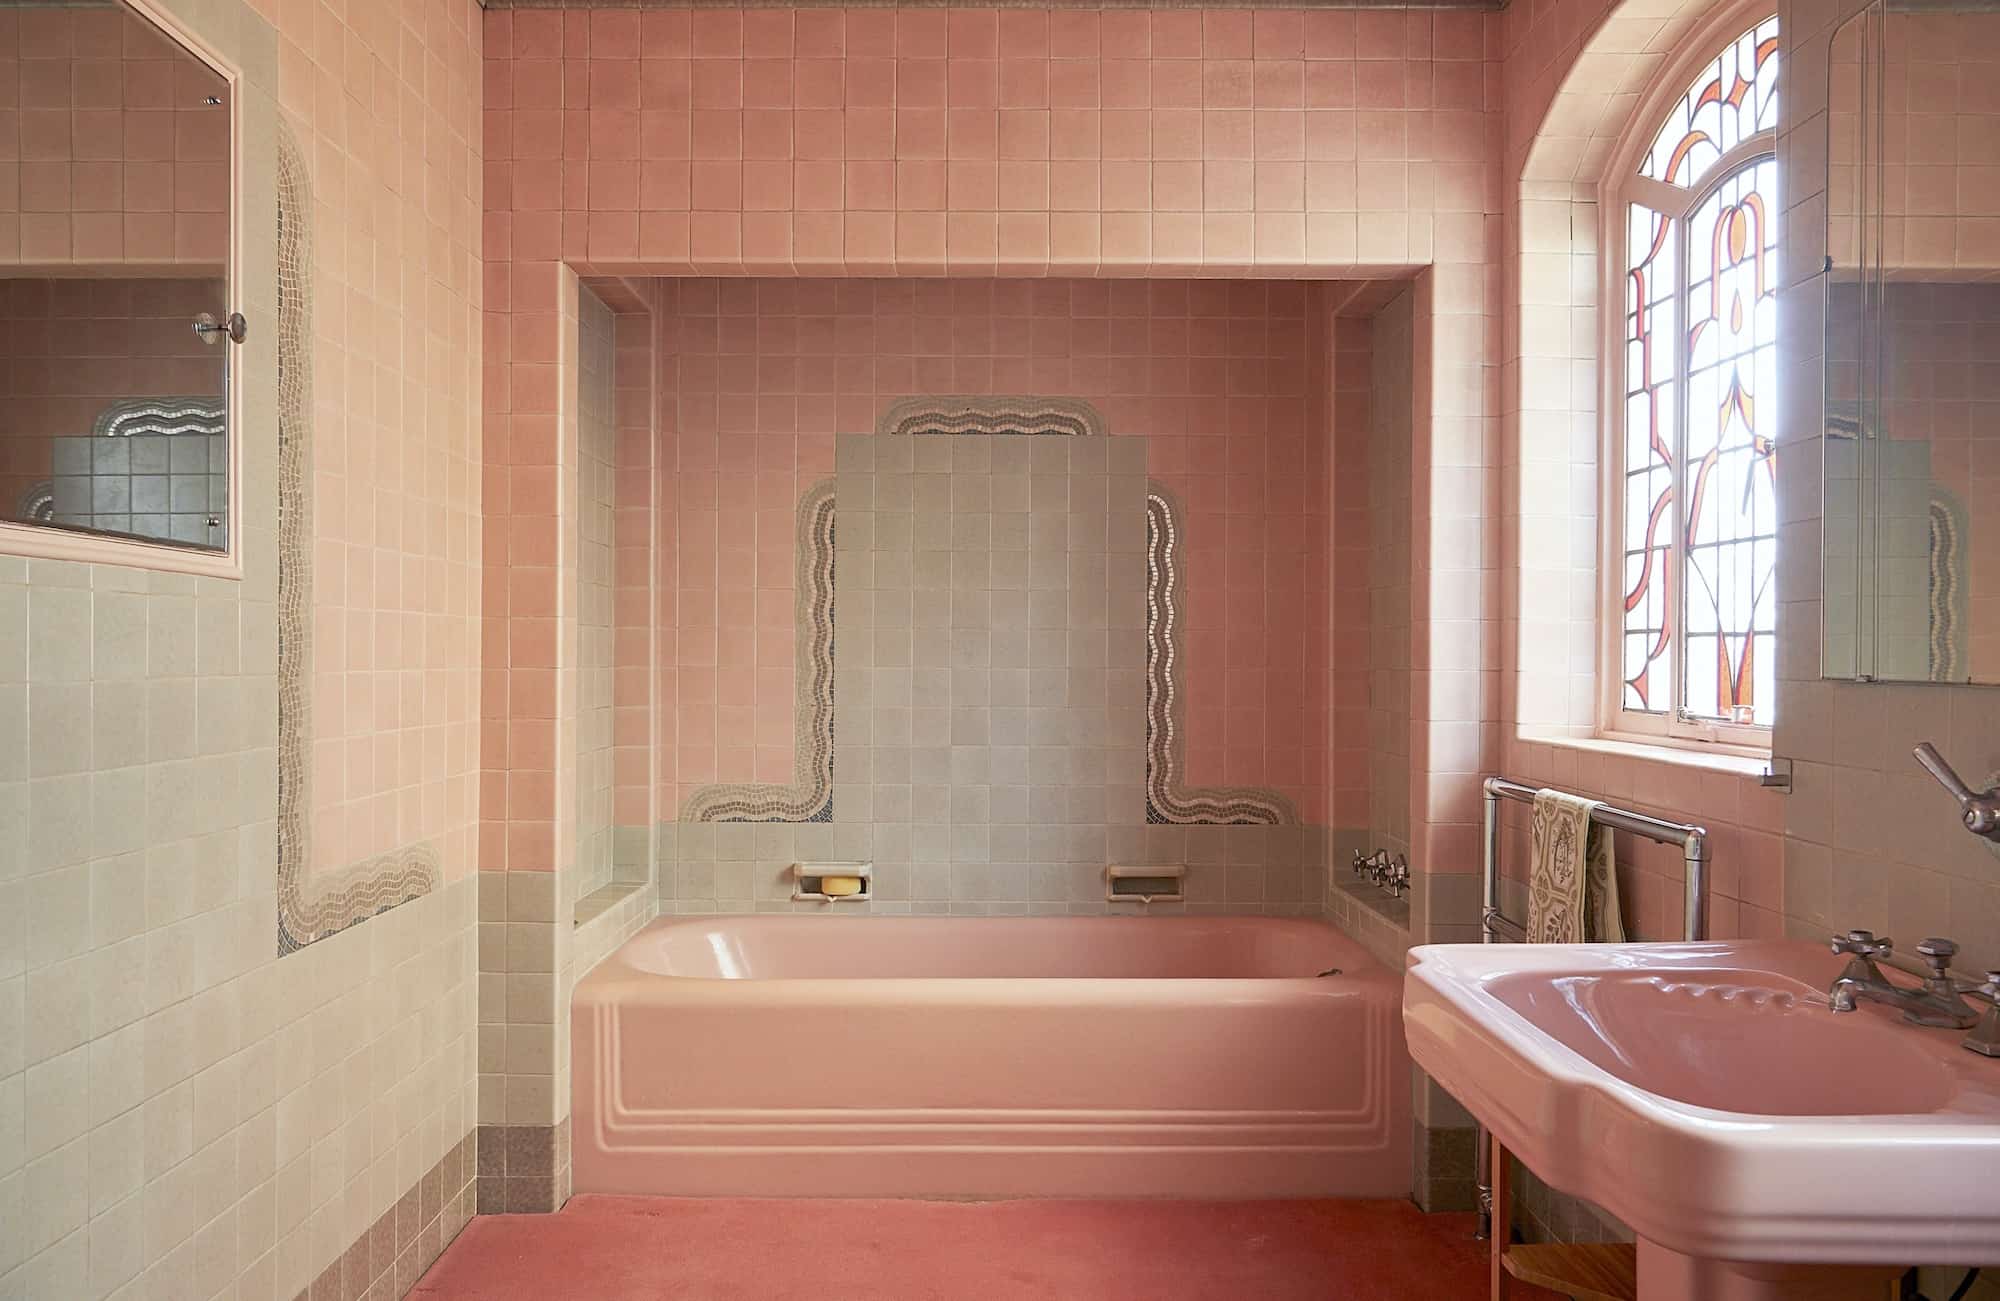 Lillian Nw - Blog Post - Unusual Locations - Pink tiled bathroom with pink carpet on the floor - The Location Guys